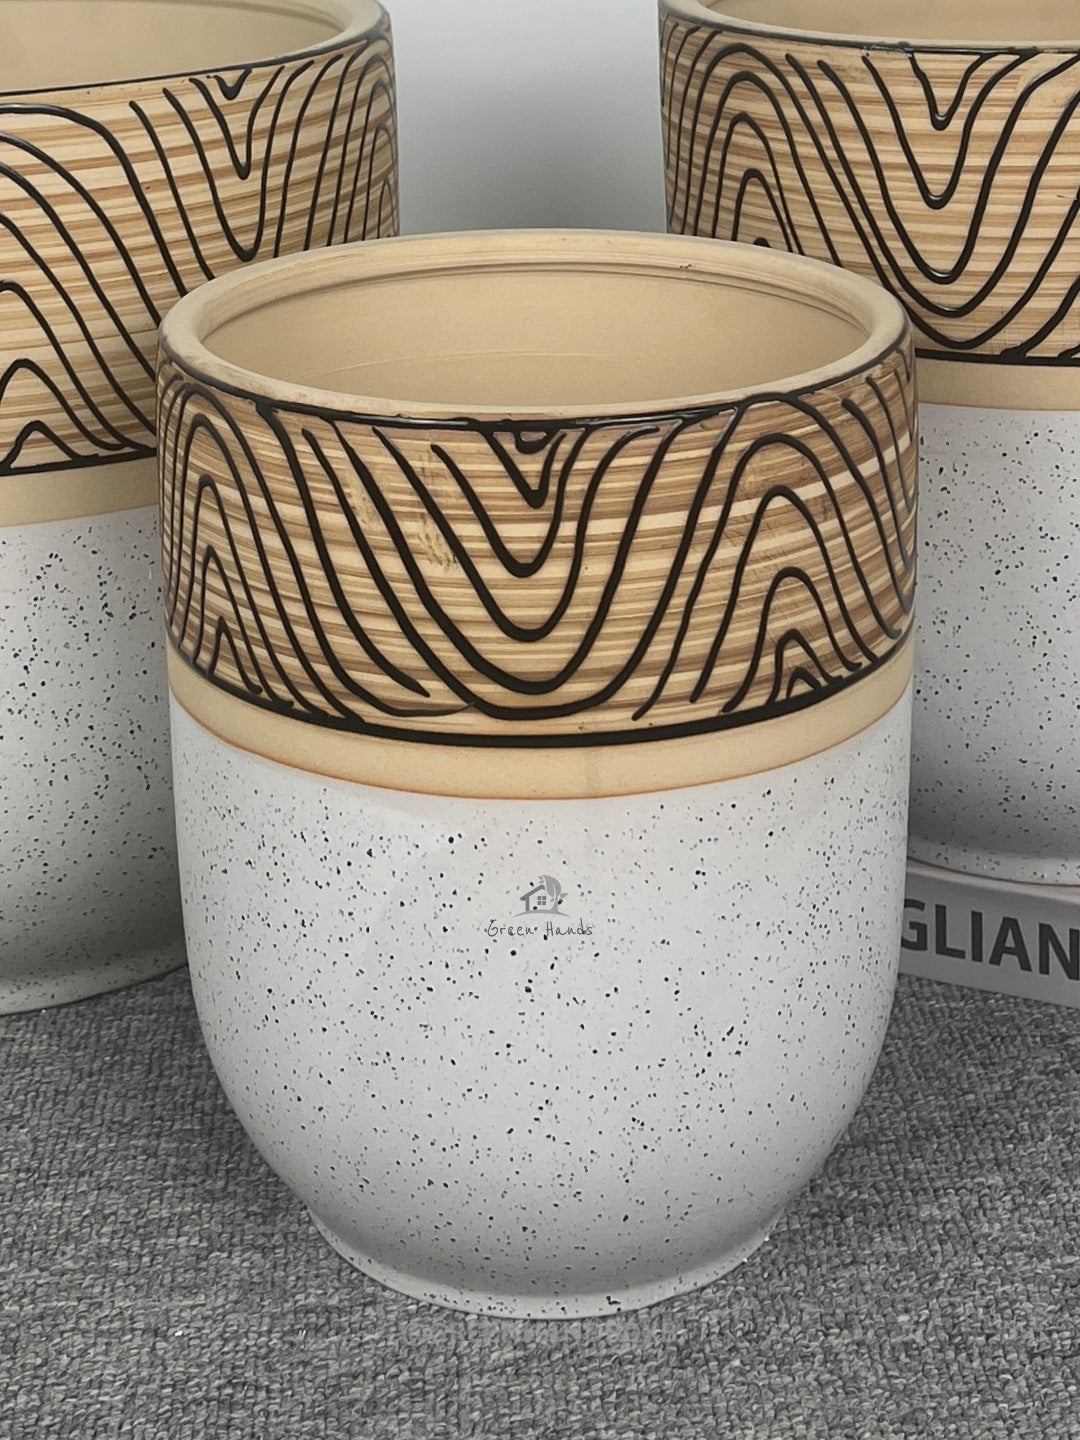 Nature Lover's White Ceramic Pots with Wooden Carving Finish in Dubai & Abu Dhabi: Minimalistic Artistry with Drain Holes and Base Plates